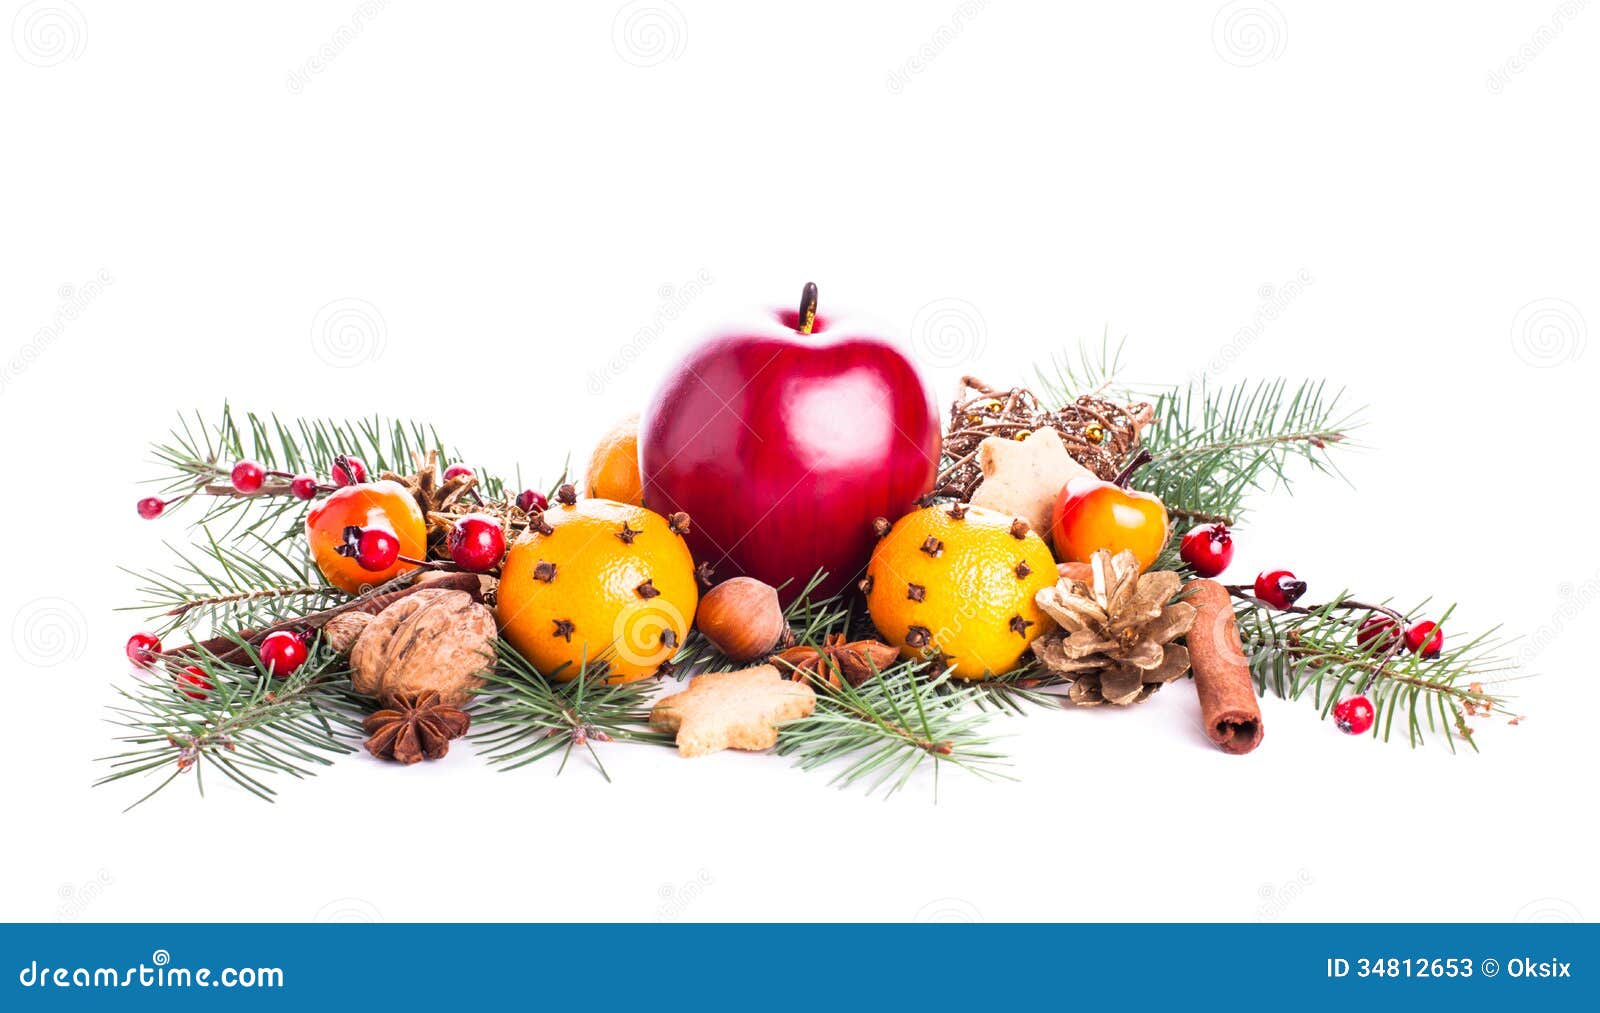 Christmas sweets stock image. Image of composition, decoration - 34812653